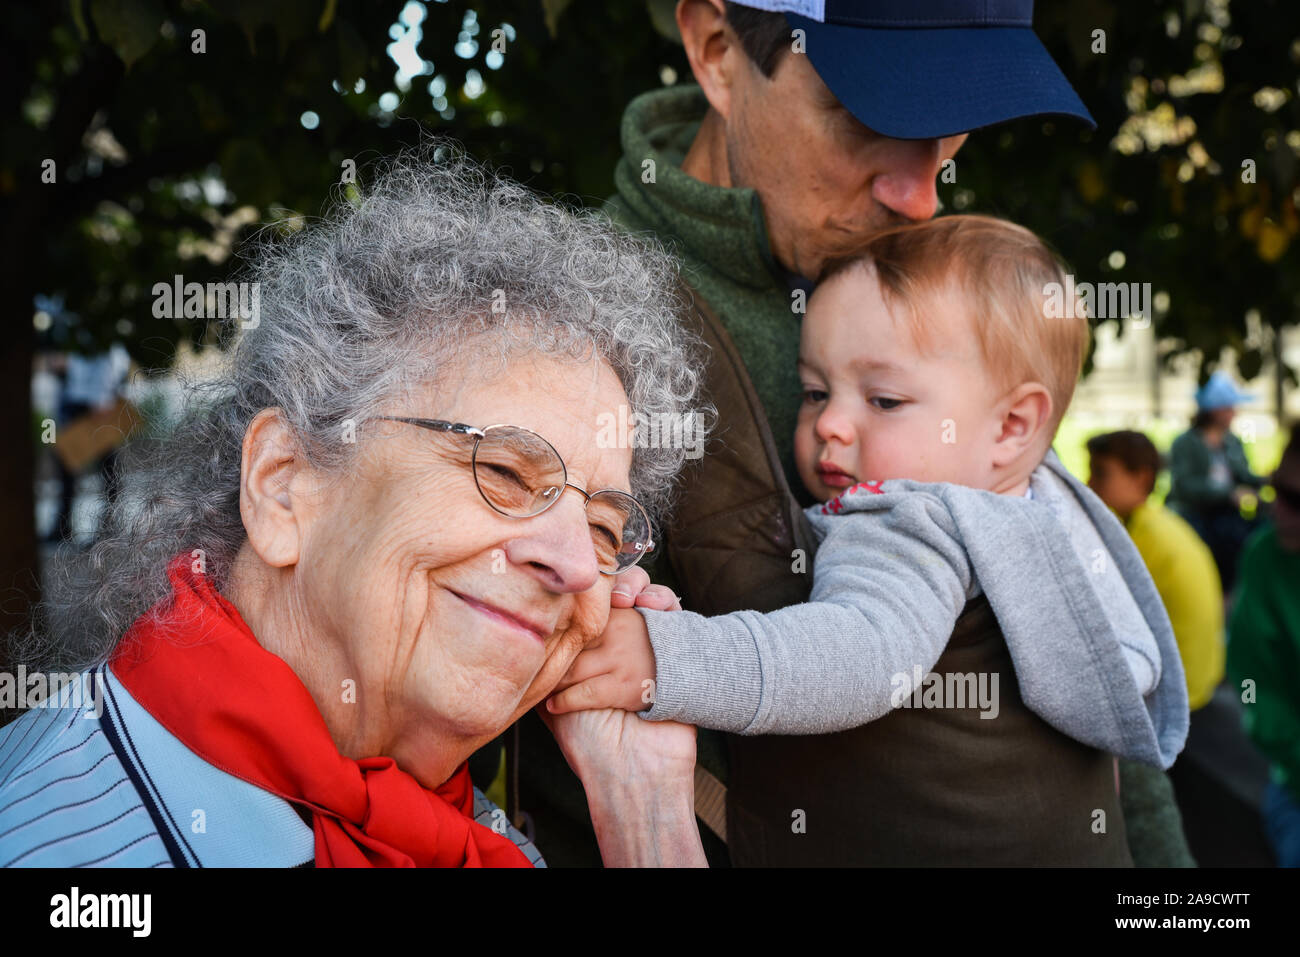 Three generations at September 2019 climate strikes (also known as Global Week for Future), Montpelier, VT, USA. Stock Photo